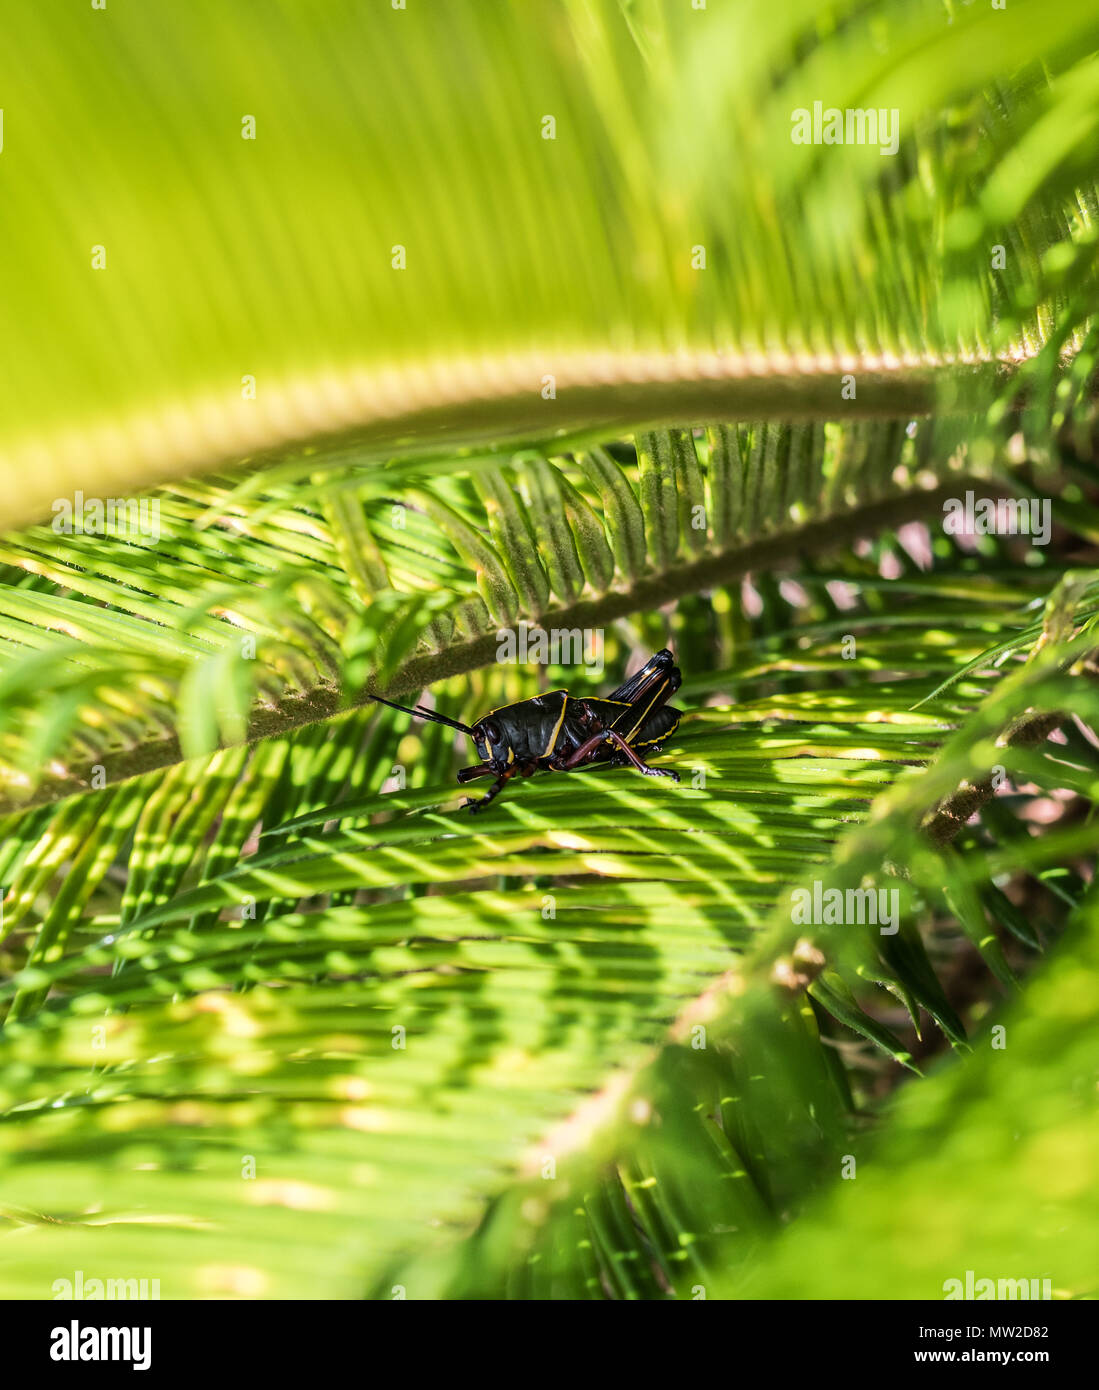 A young Eastern Lubber Grasshopper on the leaves of a Sago Palm tree. Stock Photo